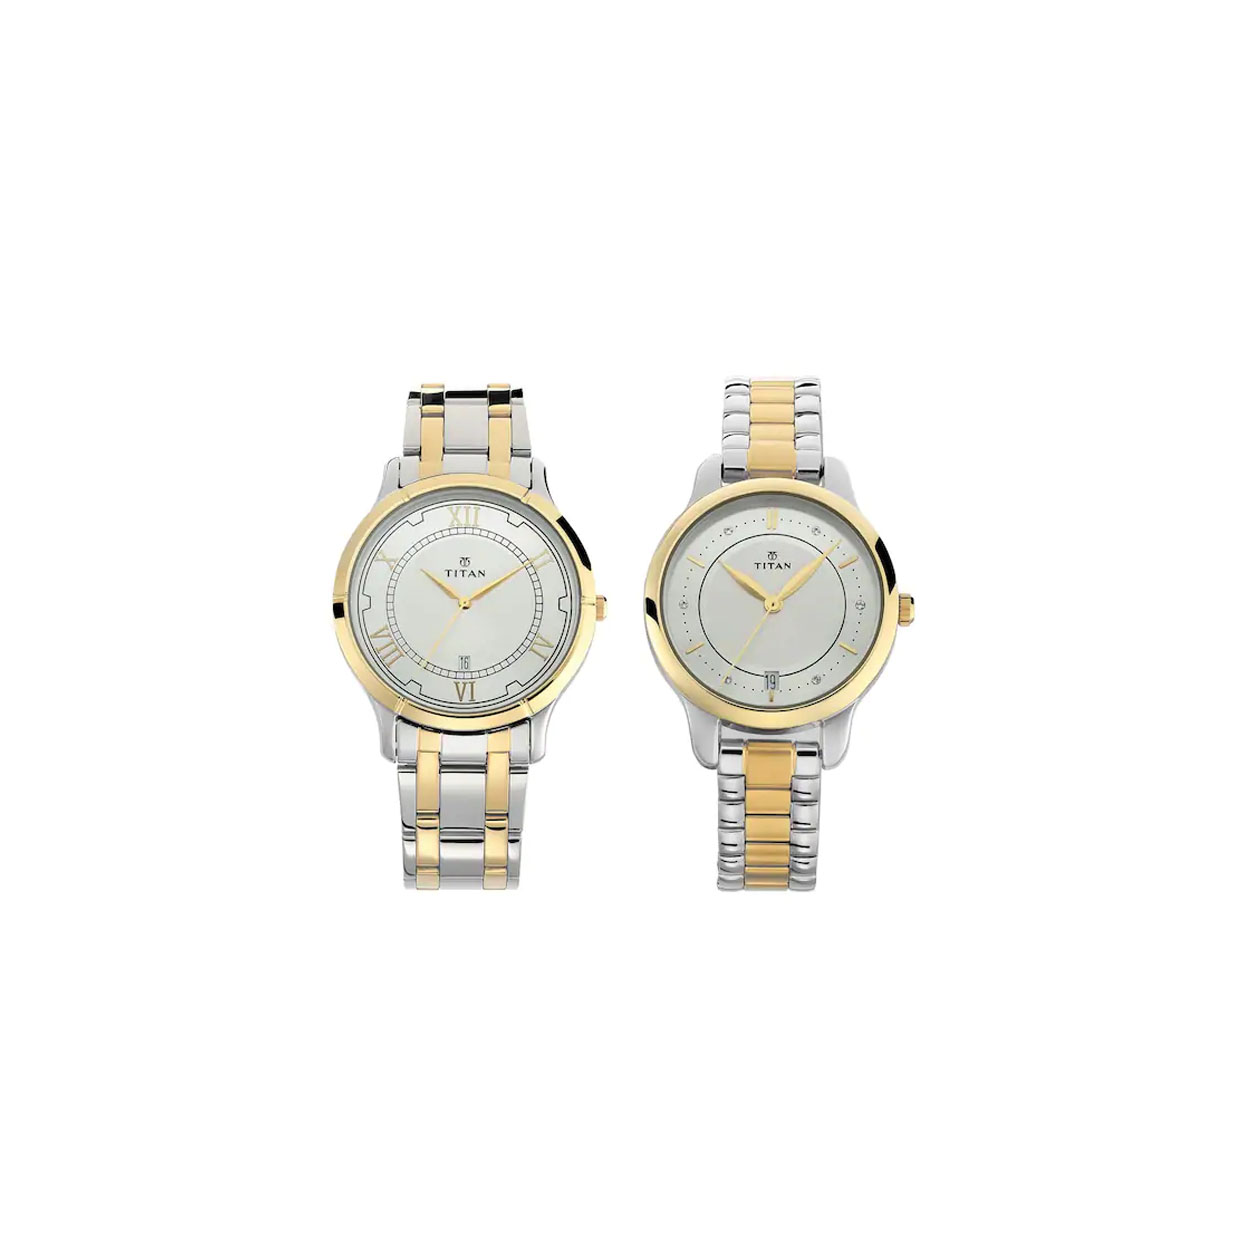 Bandhan Silver White Dial Stainless Steel Pair Watches 17752481BM01